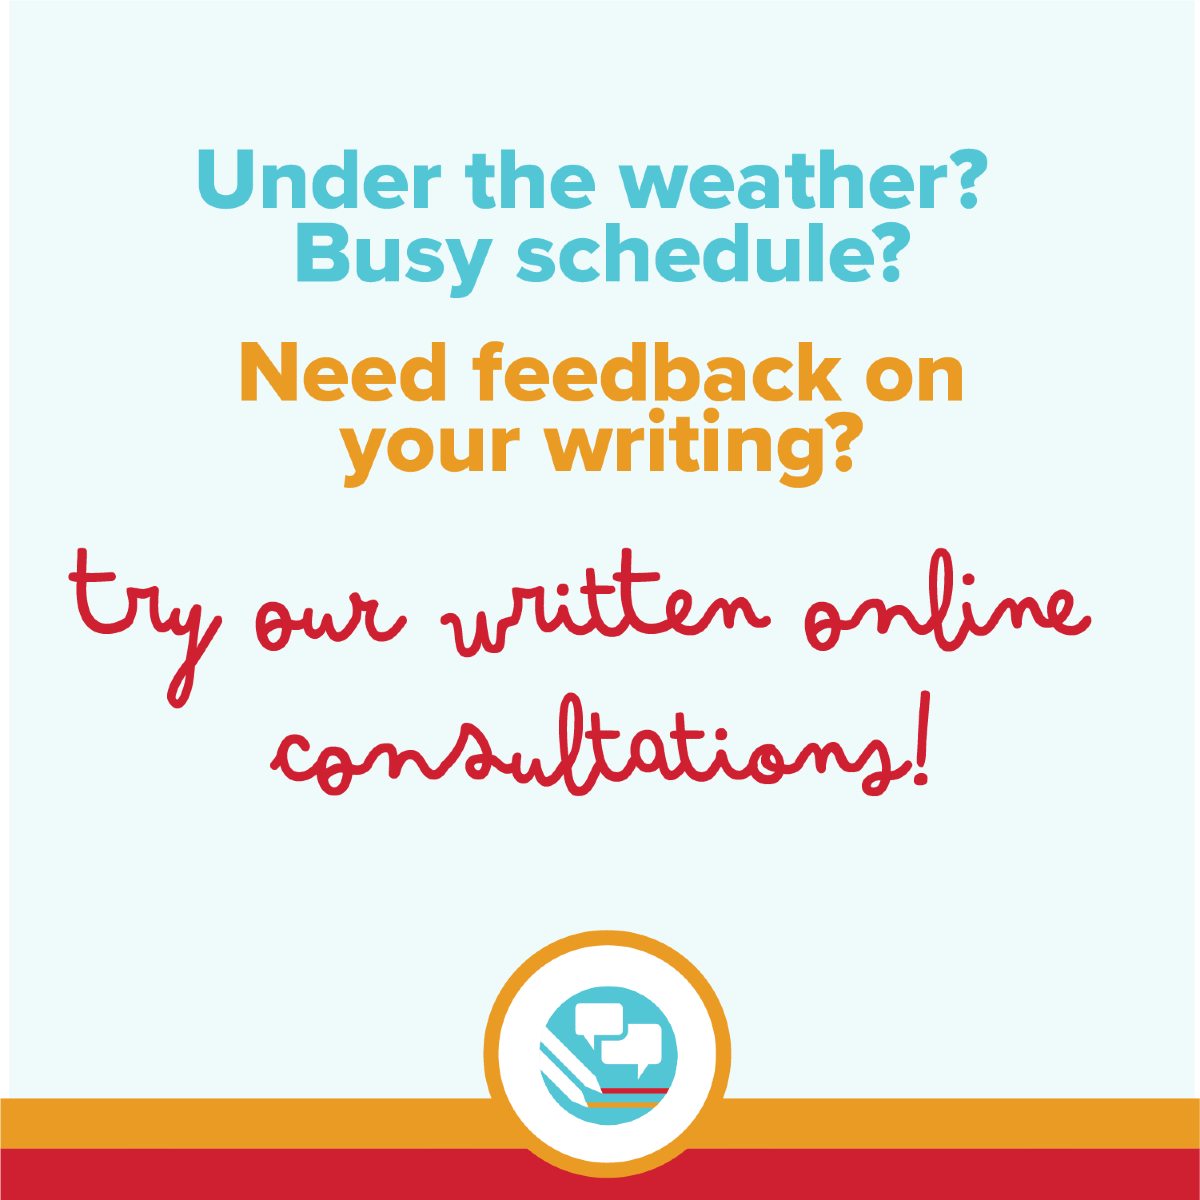 Under the weather? Busy schedule? Need feedback on your writing? Try Our Written Online Consultations!